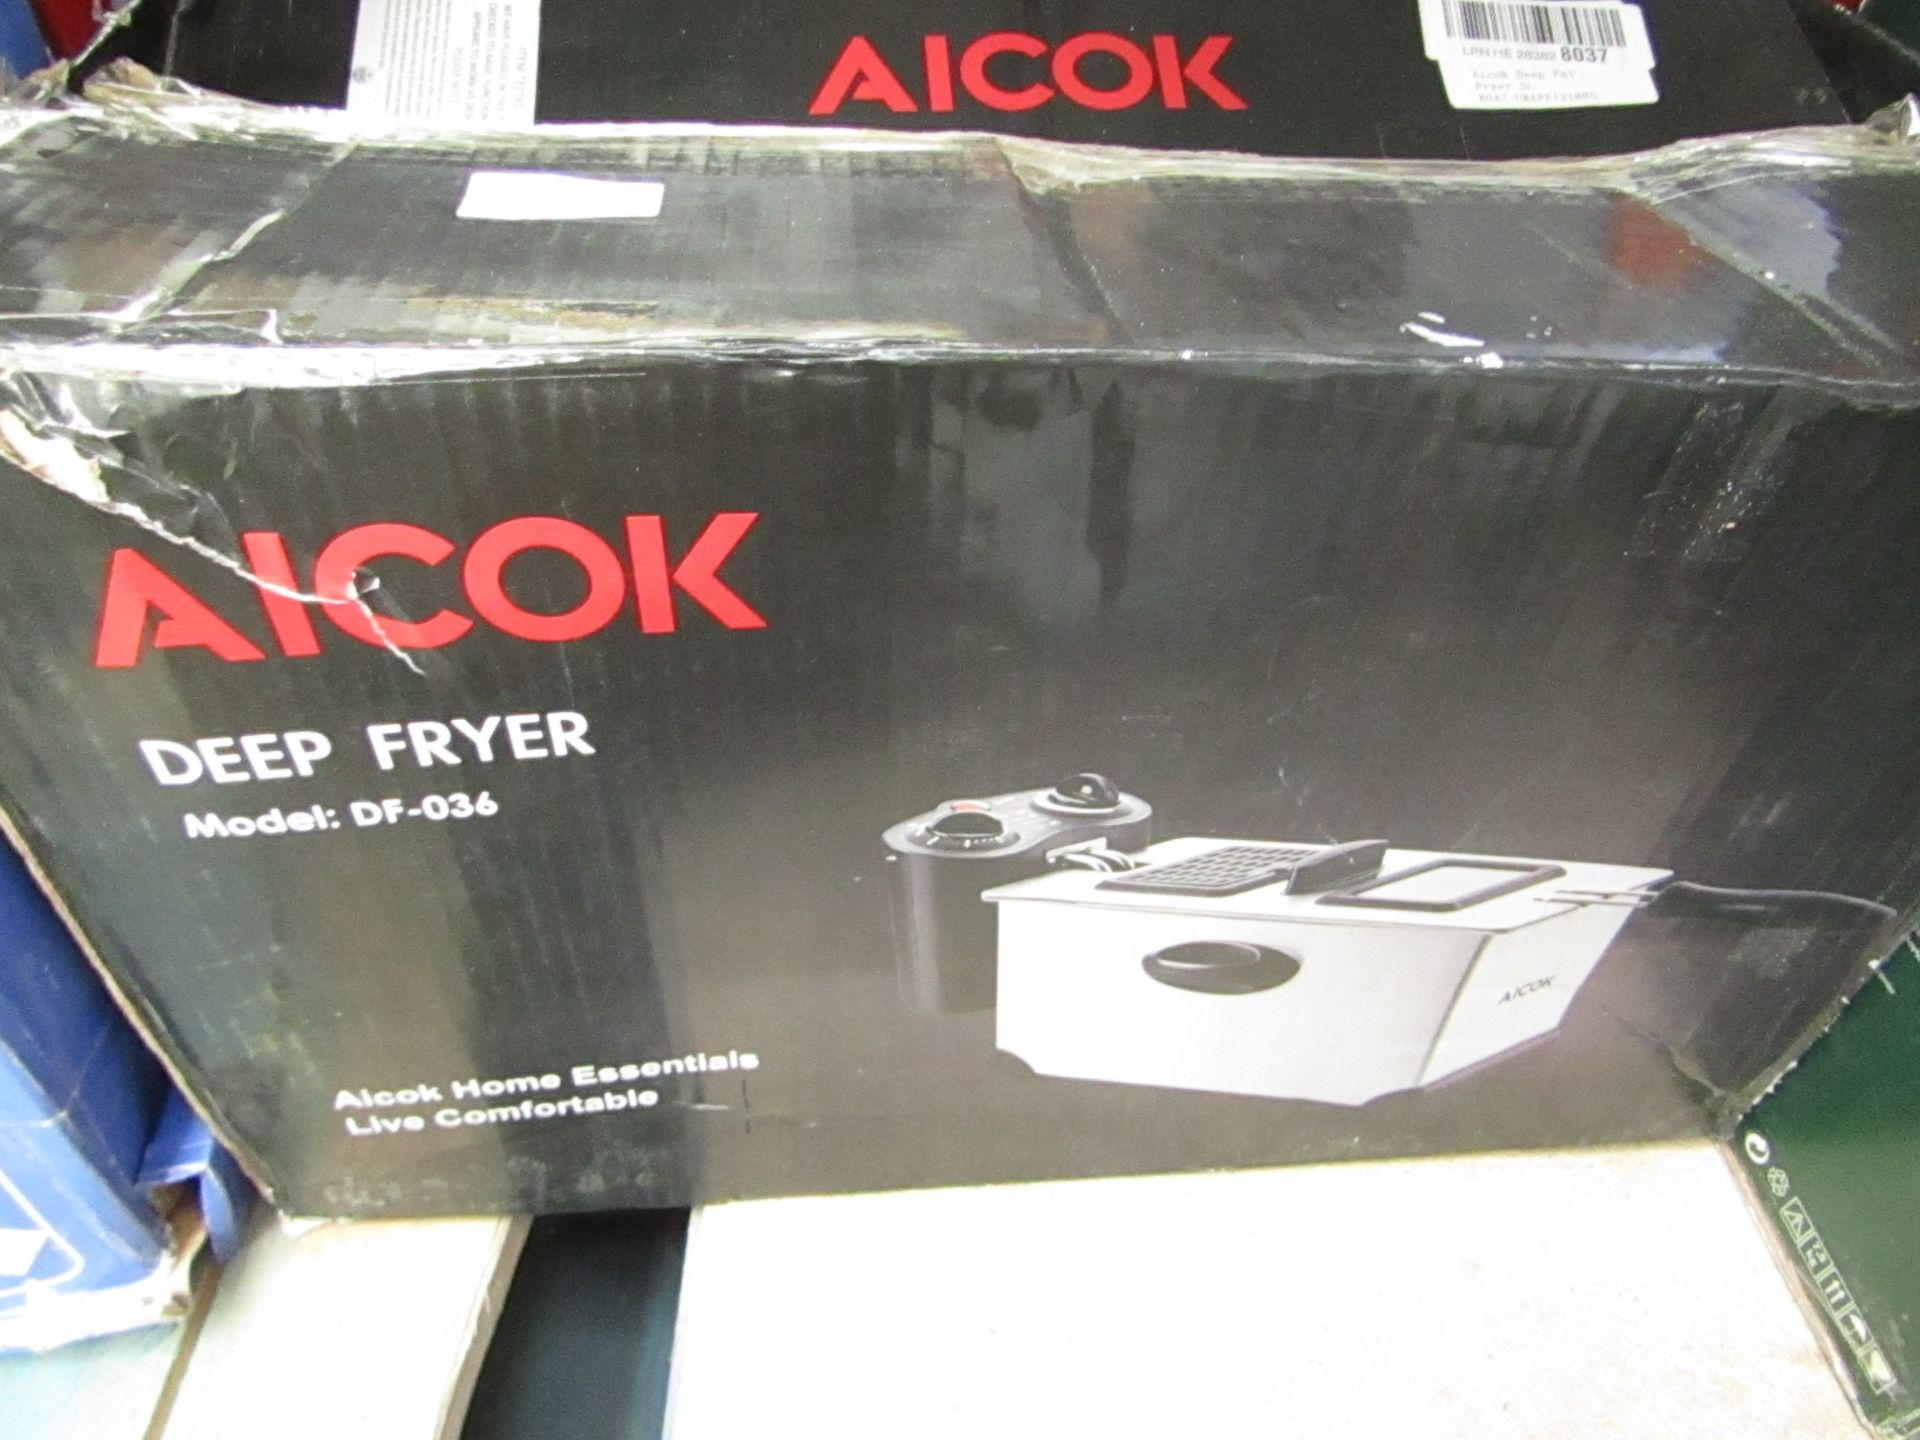 Aicok Deep fryer 3L Model: DF-036. Tested Working & Boxed